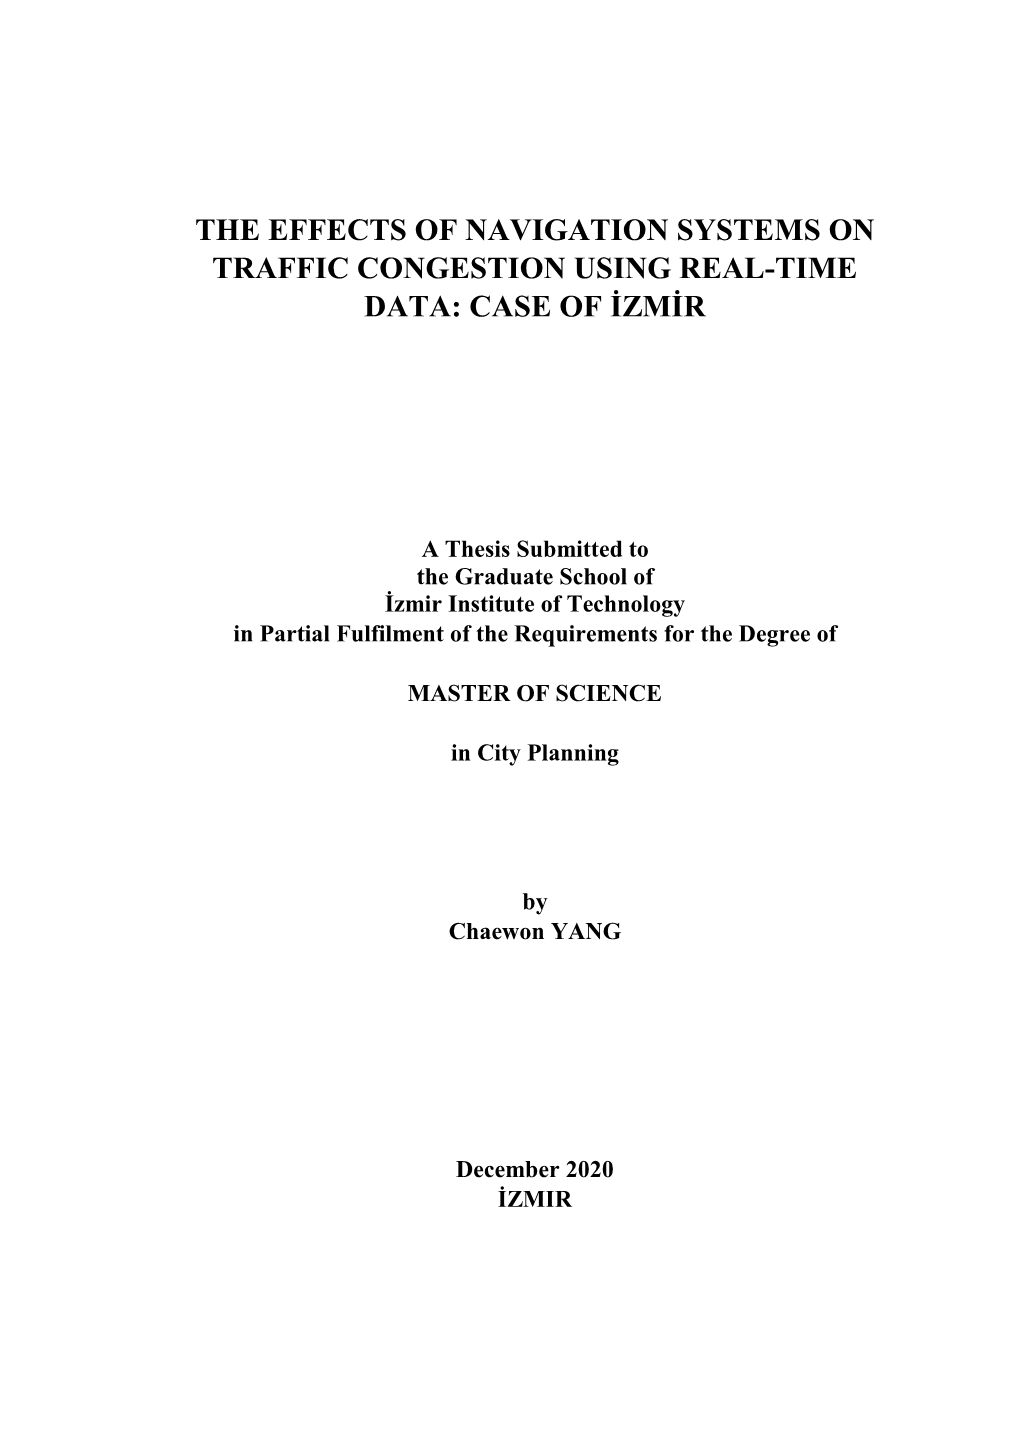 The Effects of Navigation Systems on Traffic Congestion Using Real-Time Data: Case of Izmir